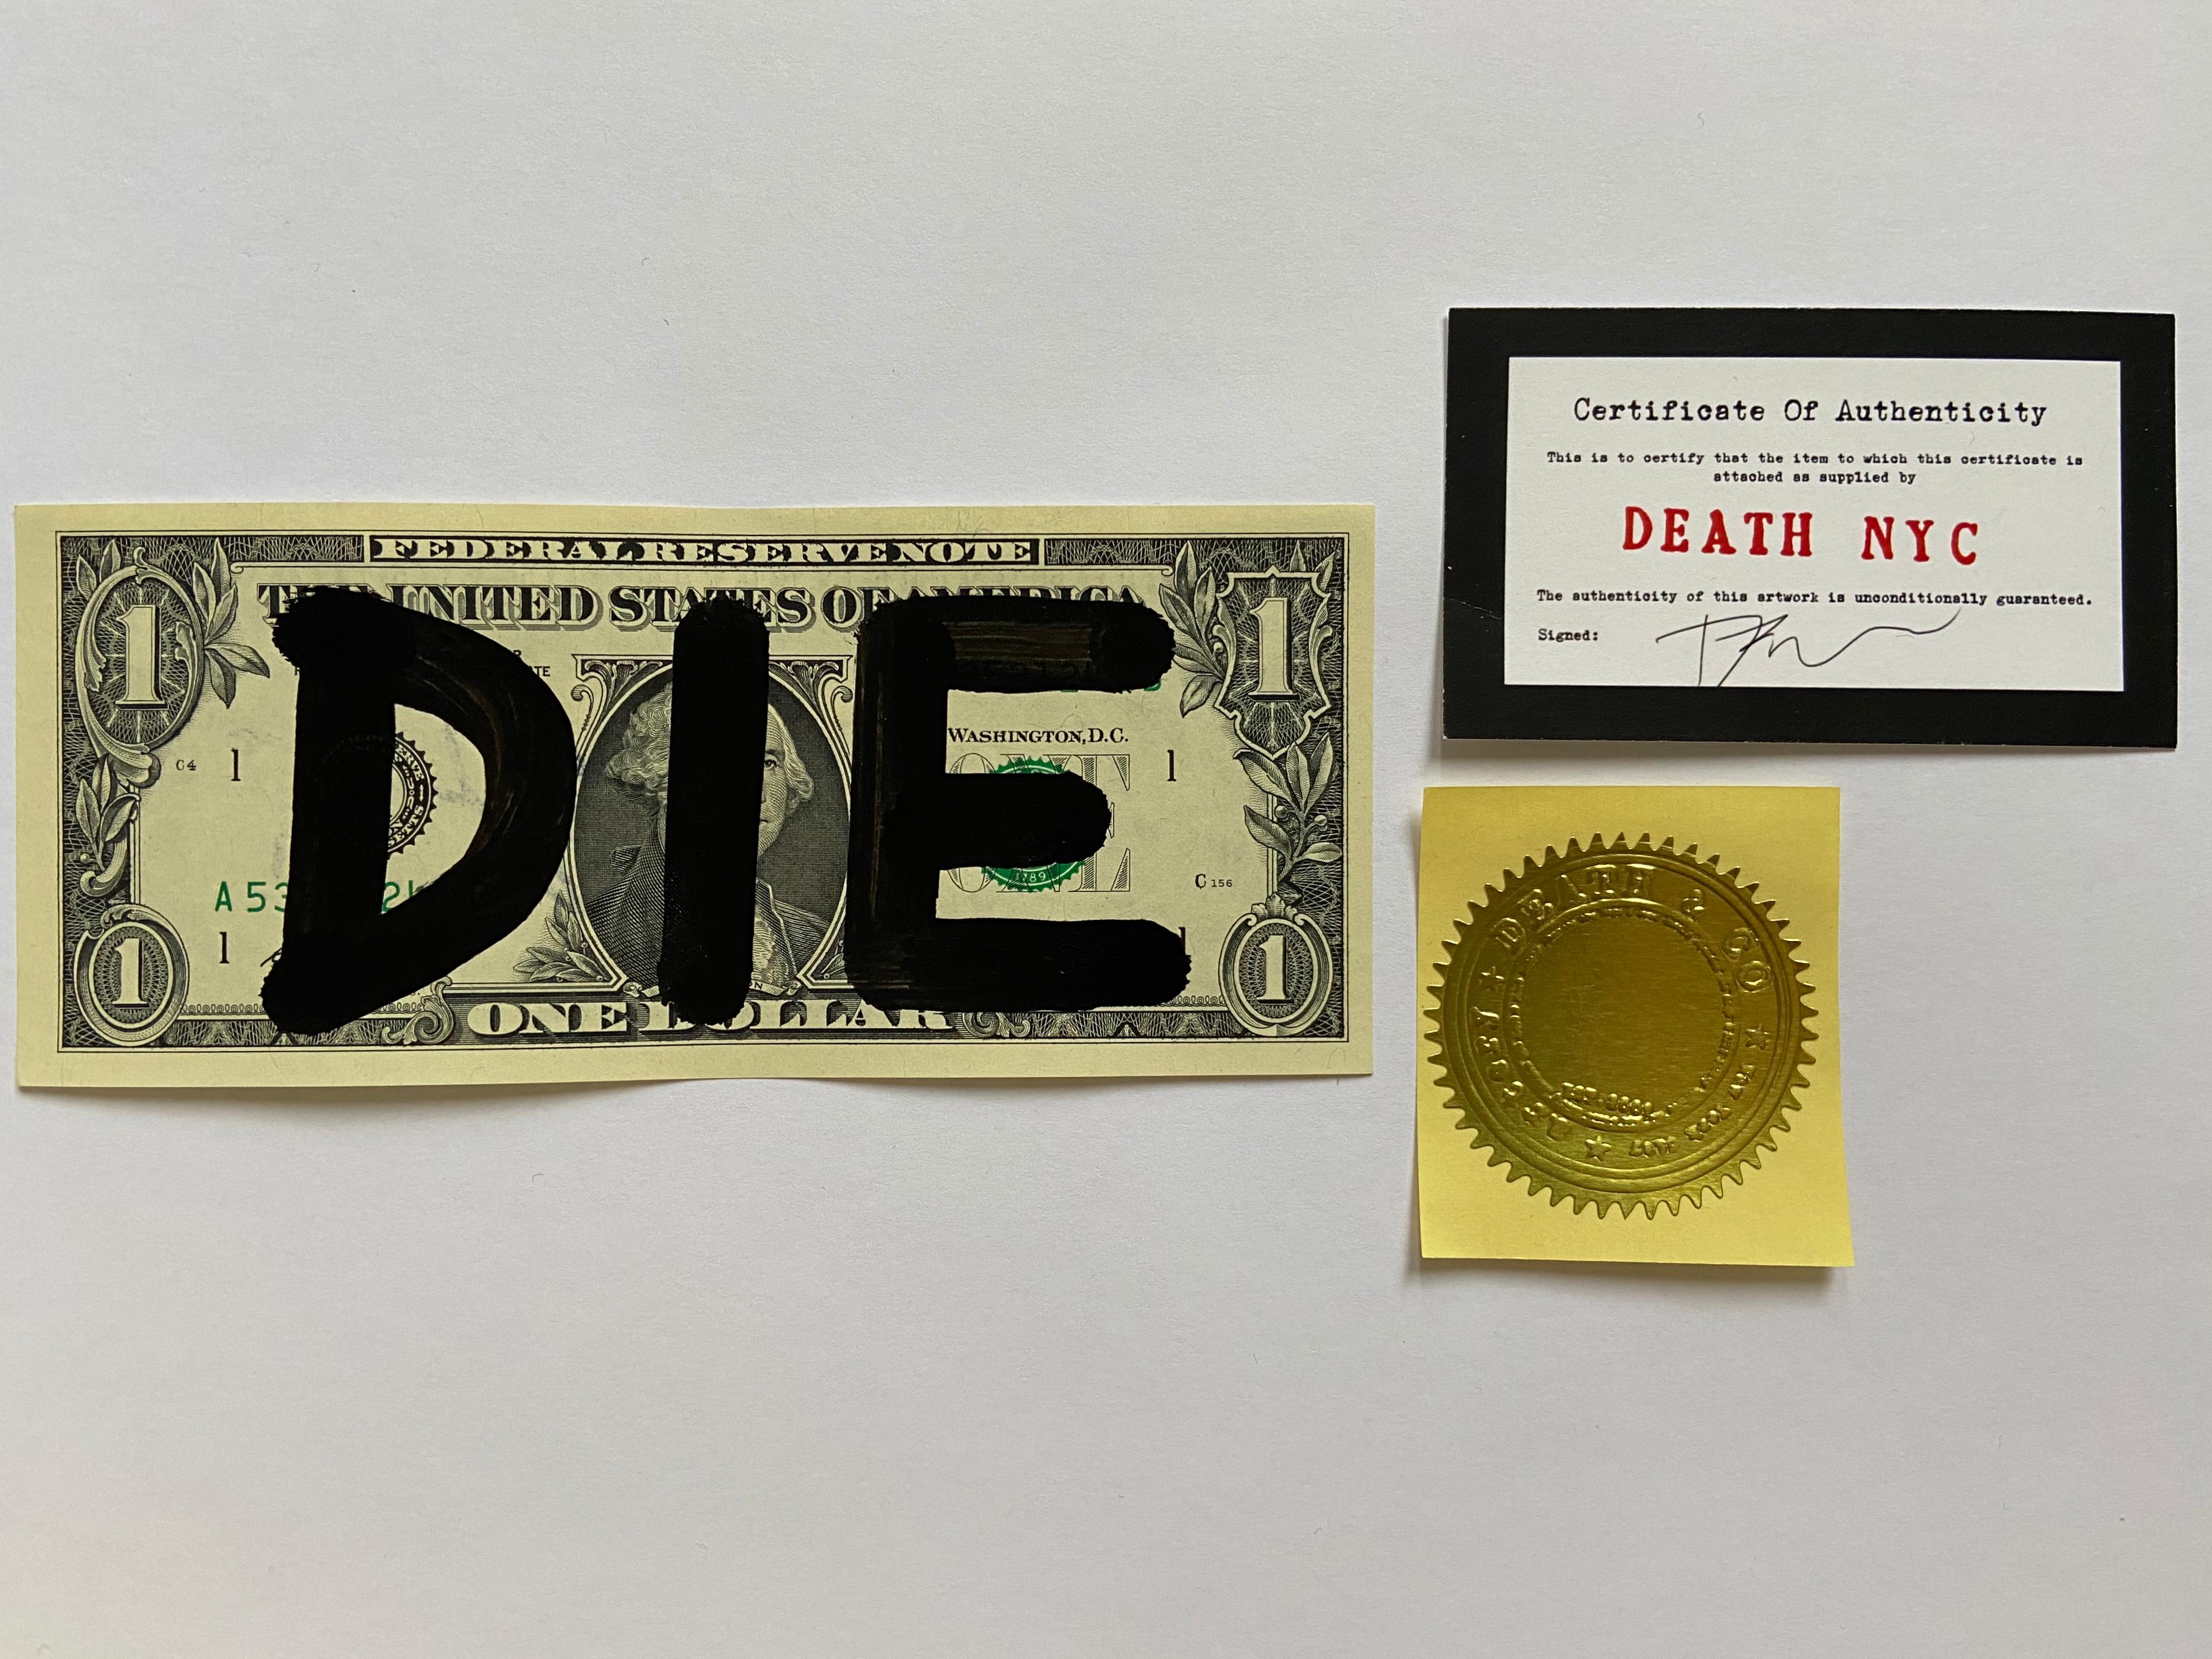 Death NYC
DIE
2017
Gluing on 1 dollar notes
Signed by the artist
Size: 7 x 15.5 cm
Original copy, delivered with certificate of authenticity and stamp of the artist
Perfect condition 
99 euros